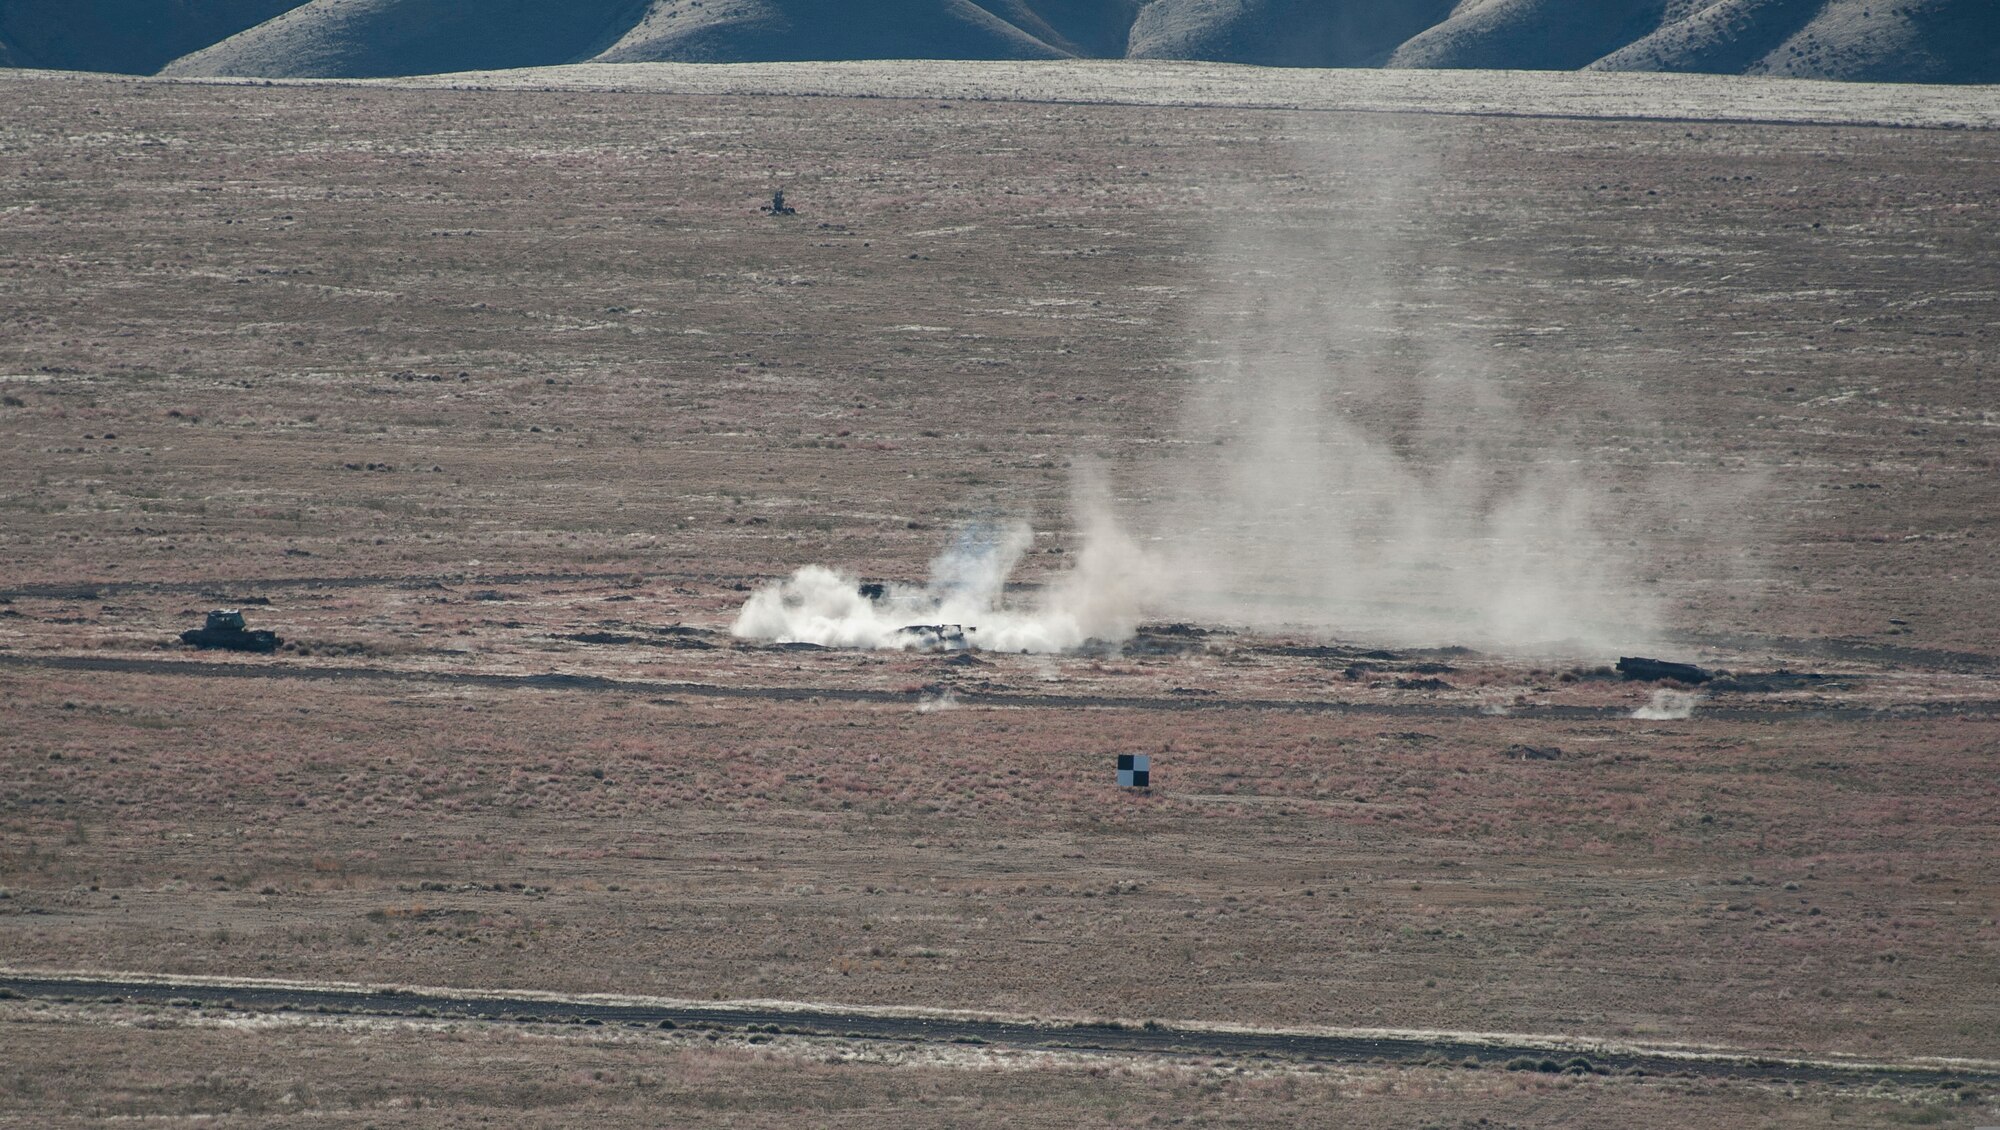 The ground erupts at Mountain Home Air Force Base, Idaho, Sailor Creek Range after a U.S. Navy AV8-B Harrier drops a simulated bomb on target, Oct. 2, 2013, during exercise Mountain Roundup 2013. The exercise is part of the German Air Force Tornado Fighter Weapons Instructor Course Mission Employment Phase. (U.S. Air Force photo by Master Sgt. Kevin Wallace/RELEASED)